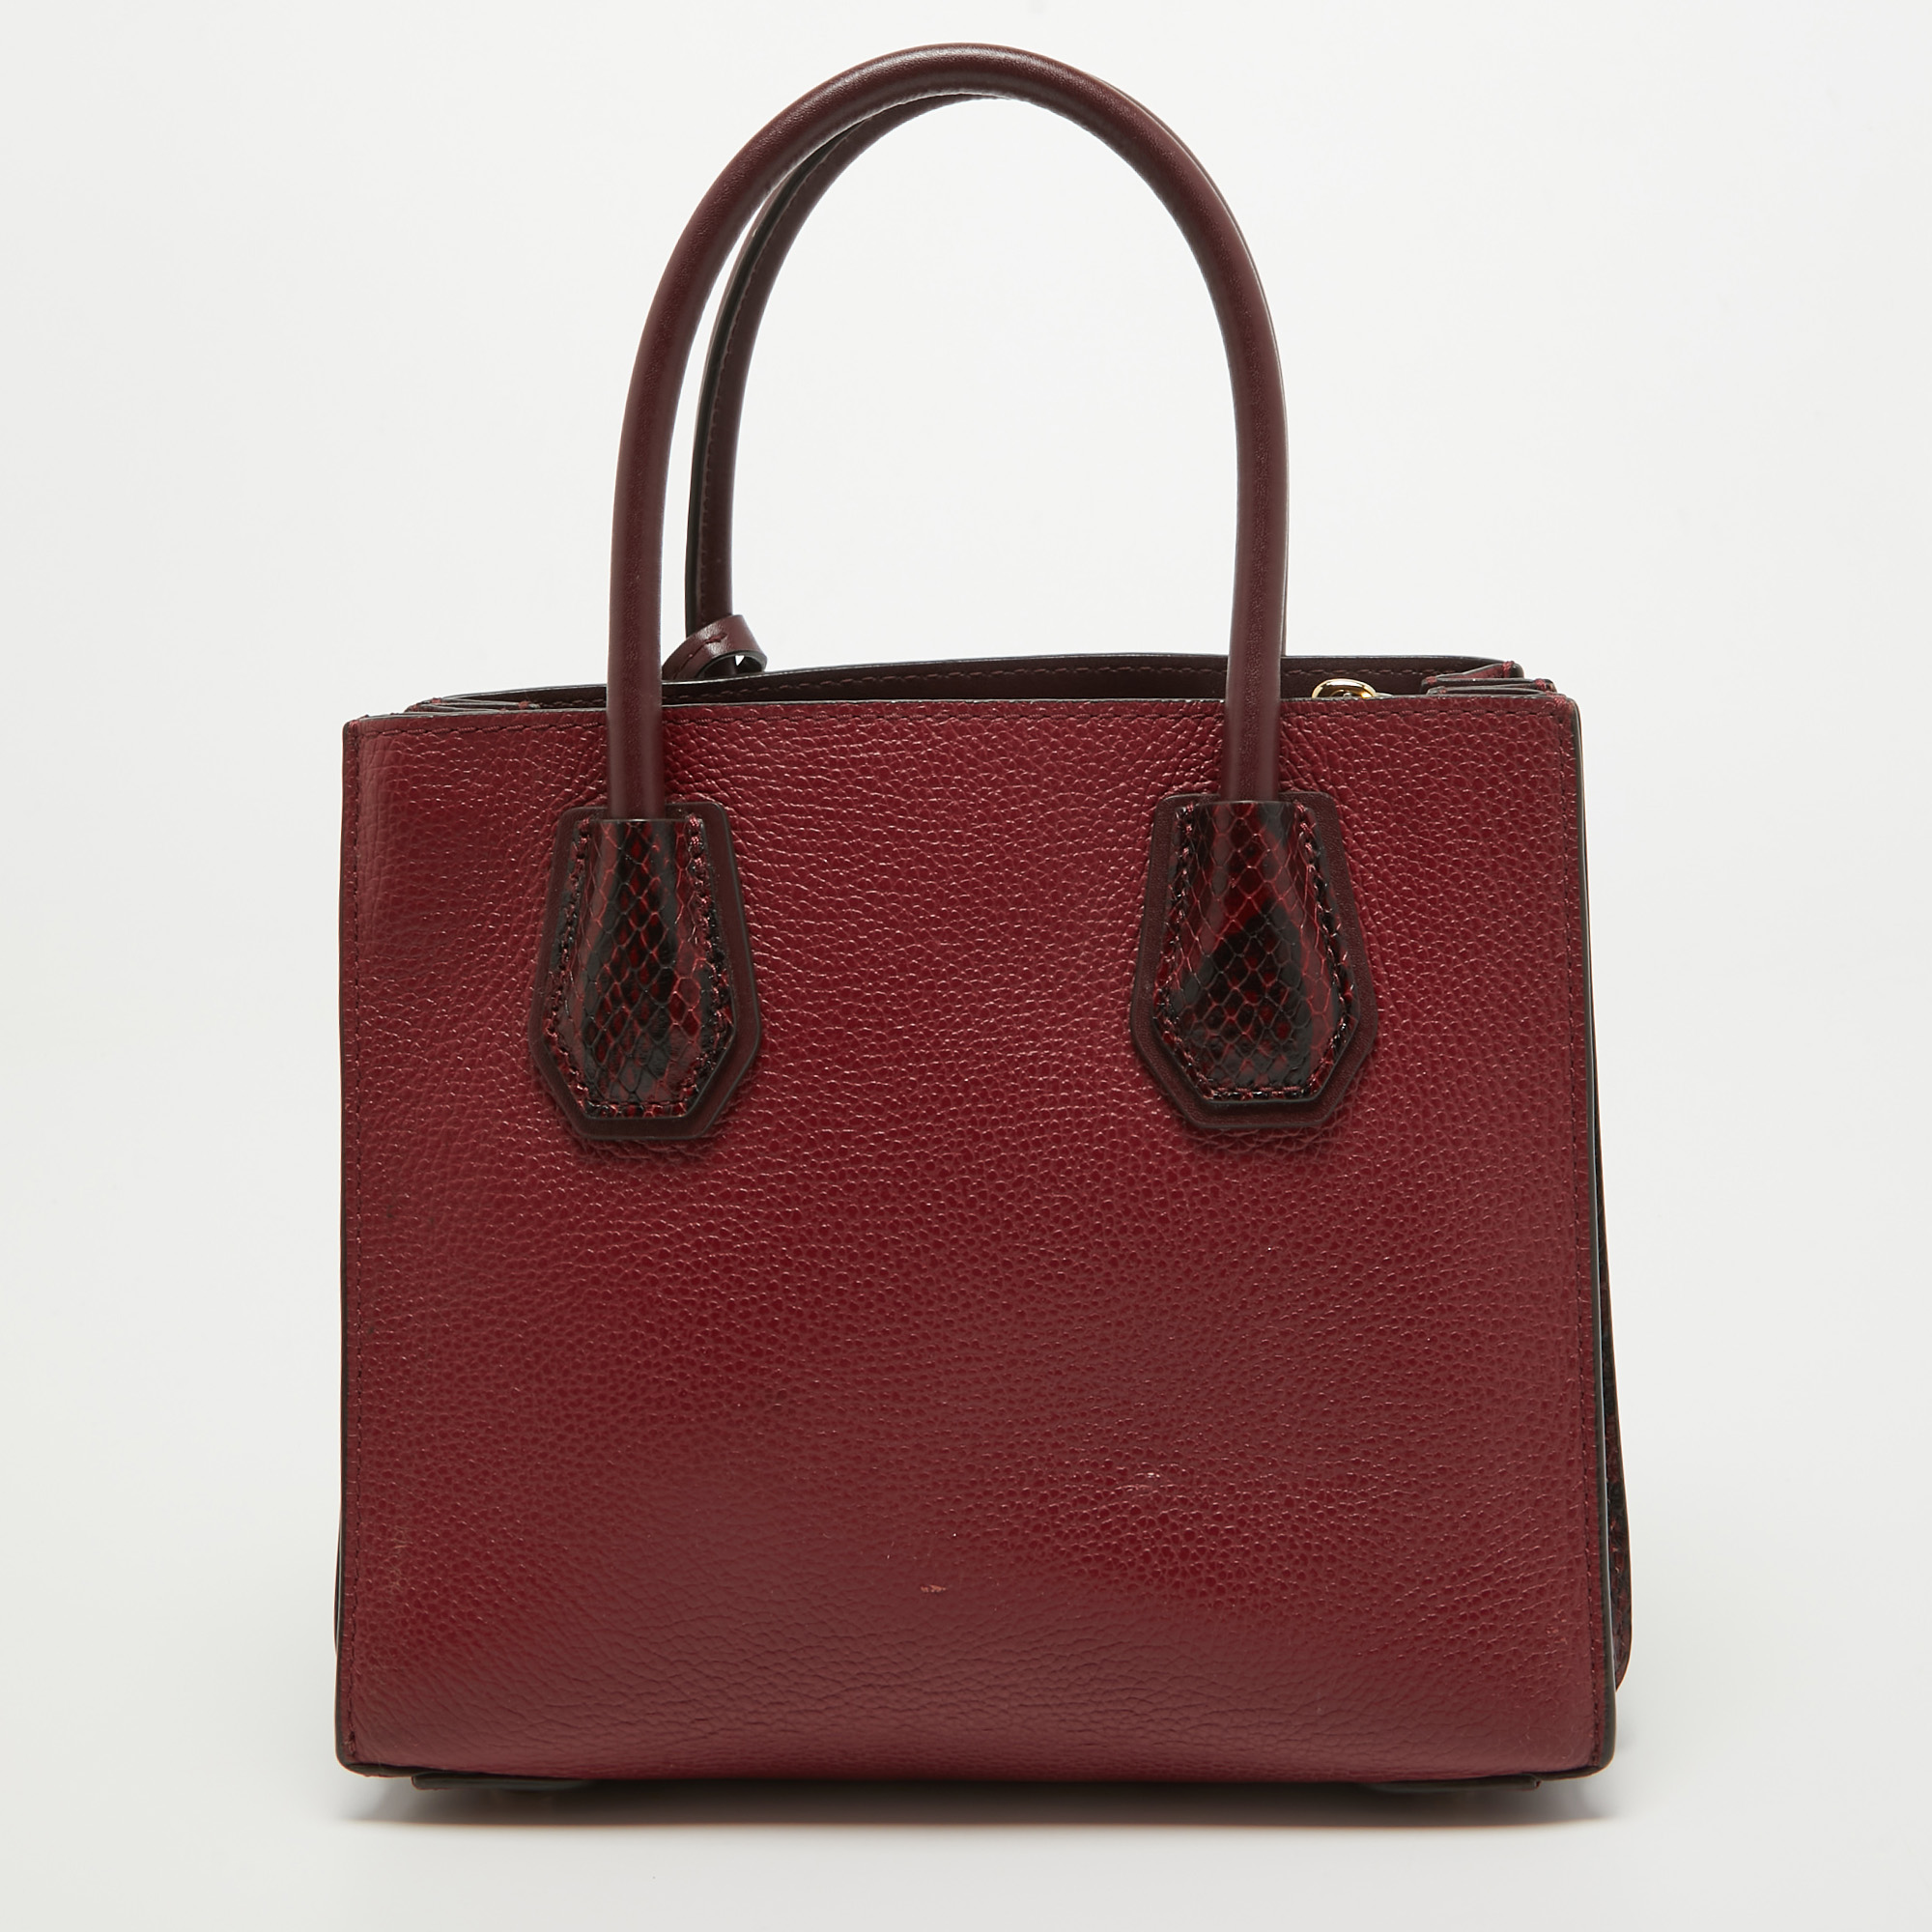 Michael Kors Red/Burgundy Leather Small Mercer Tote